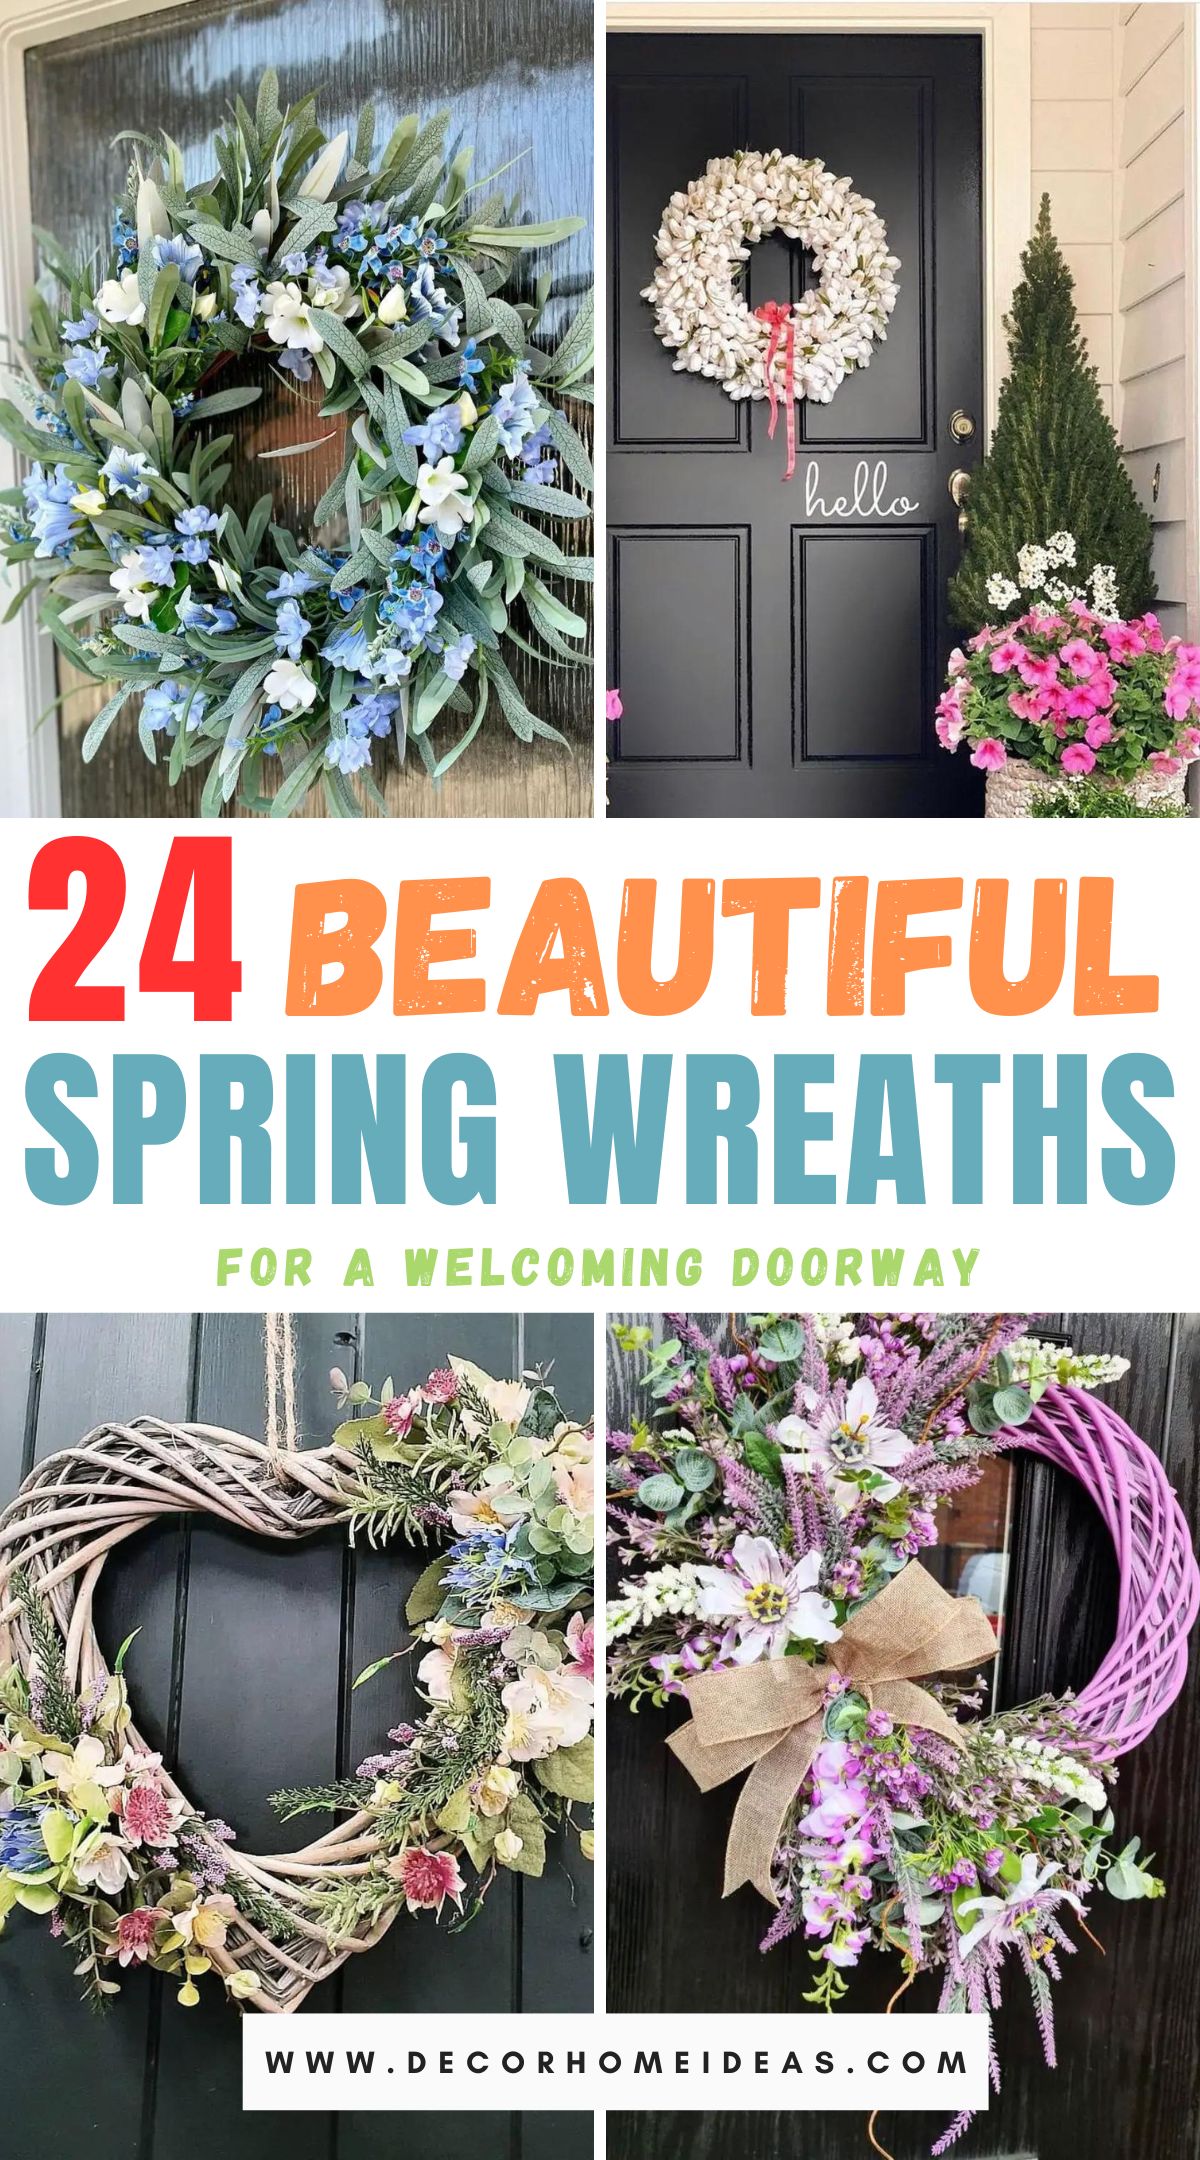 Instantly brighten your home this spring with these 24 captivating door wreaths. Explore a variety of creative and welcoming designs that add a touch of seasonal charm and beauty to your entrance.